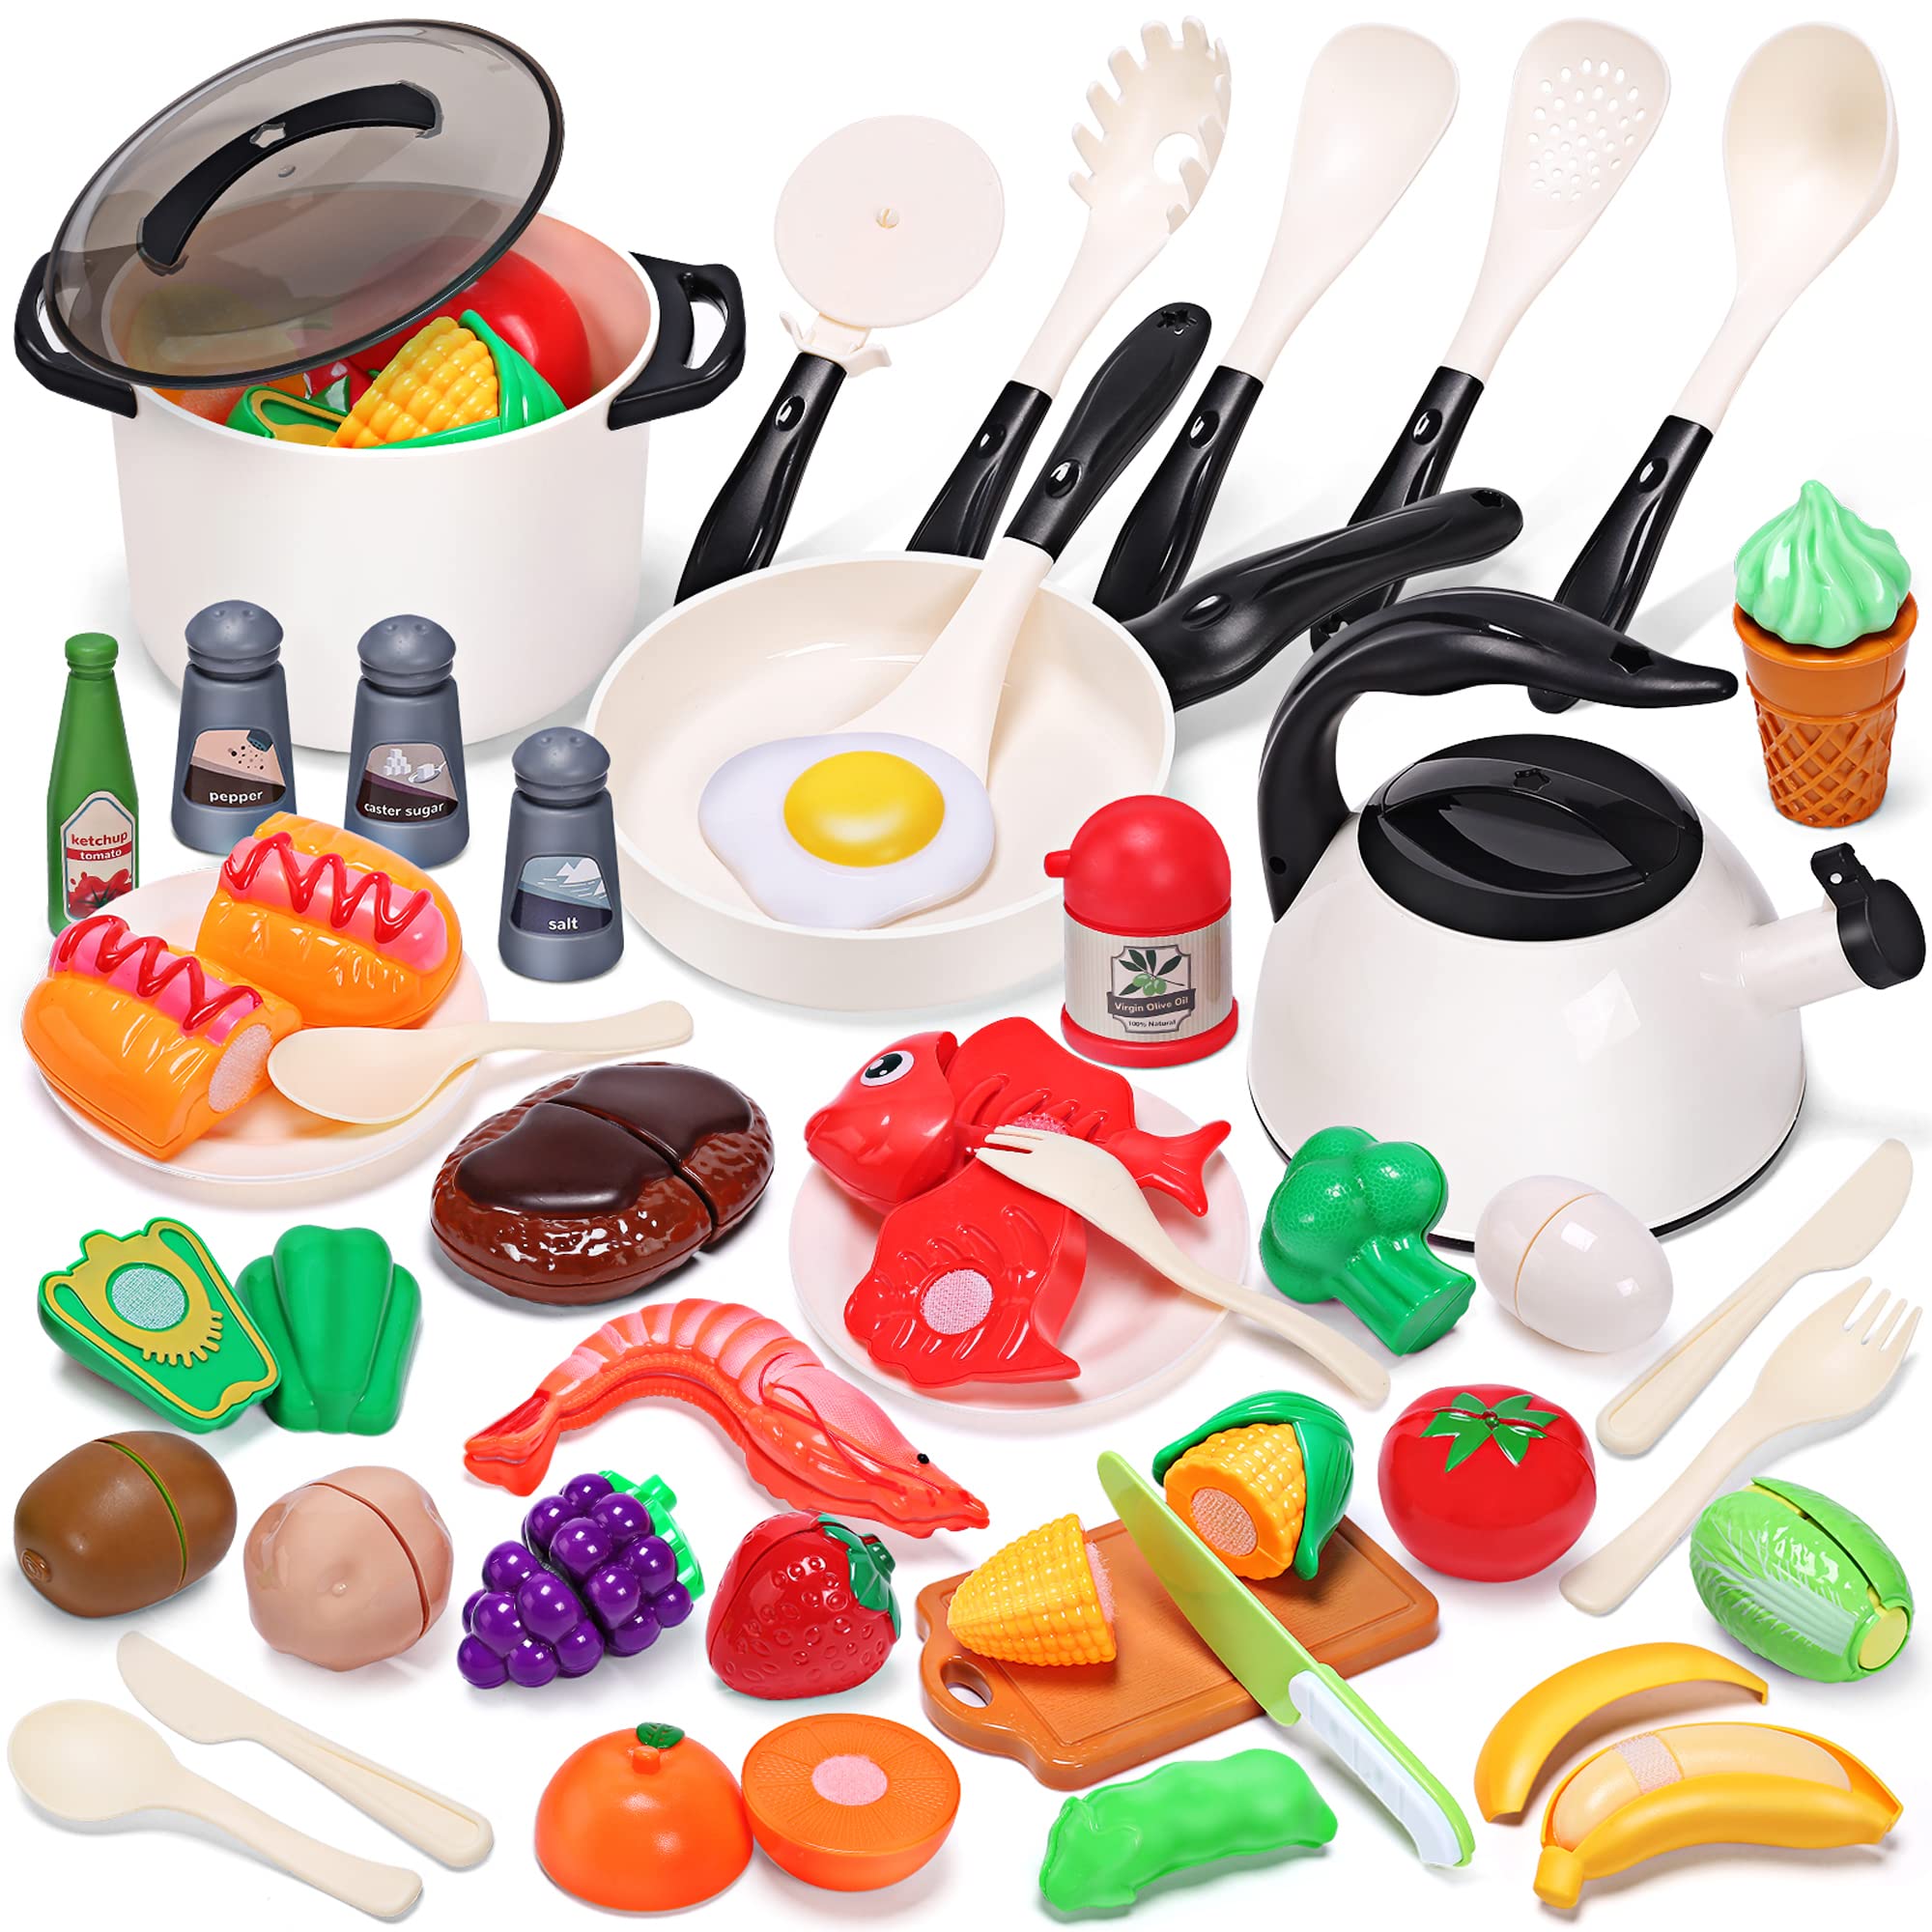 Cute Stone CUTE STONE Pretend Play Kitchen Toys with Stainless Steel  Cookware Pots and Pans Set, Toy Cooking Utensils, Apron, Cutting